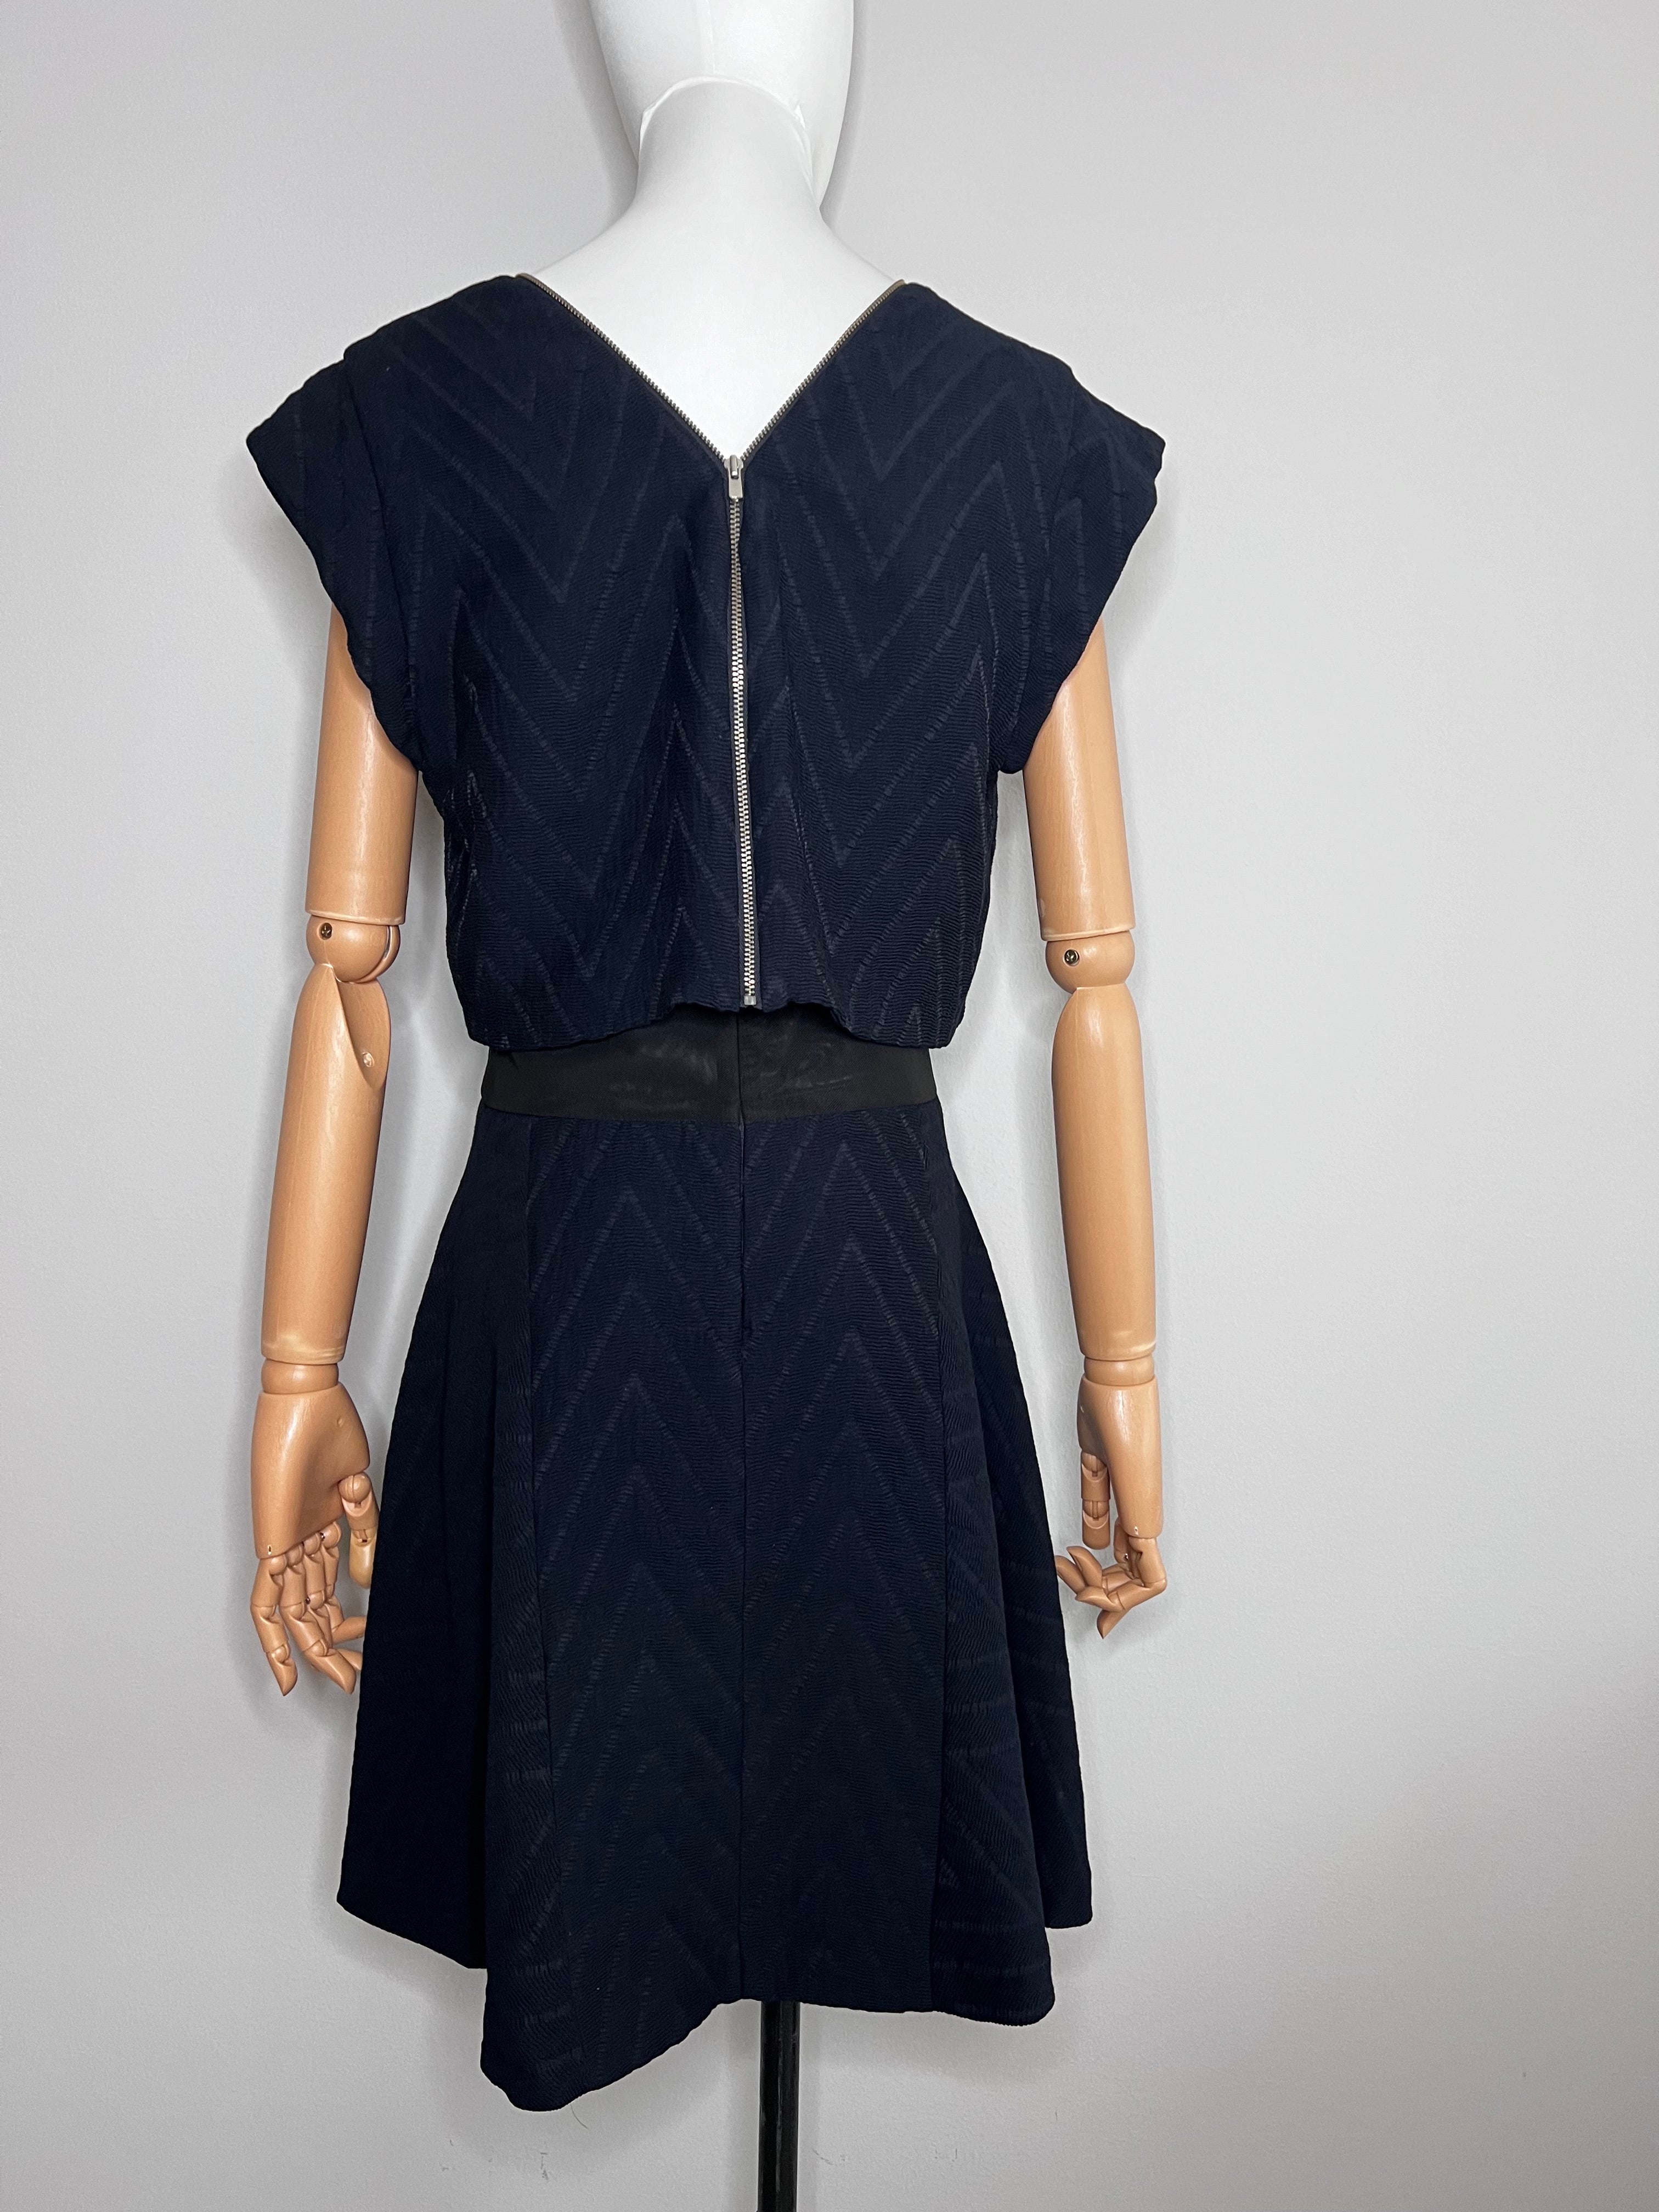 Navy blue A-line dress patterned ruffled and mesh accents short sleeve with exposed zip closure at back - MAJE